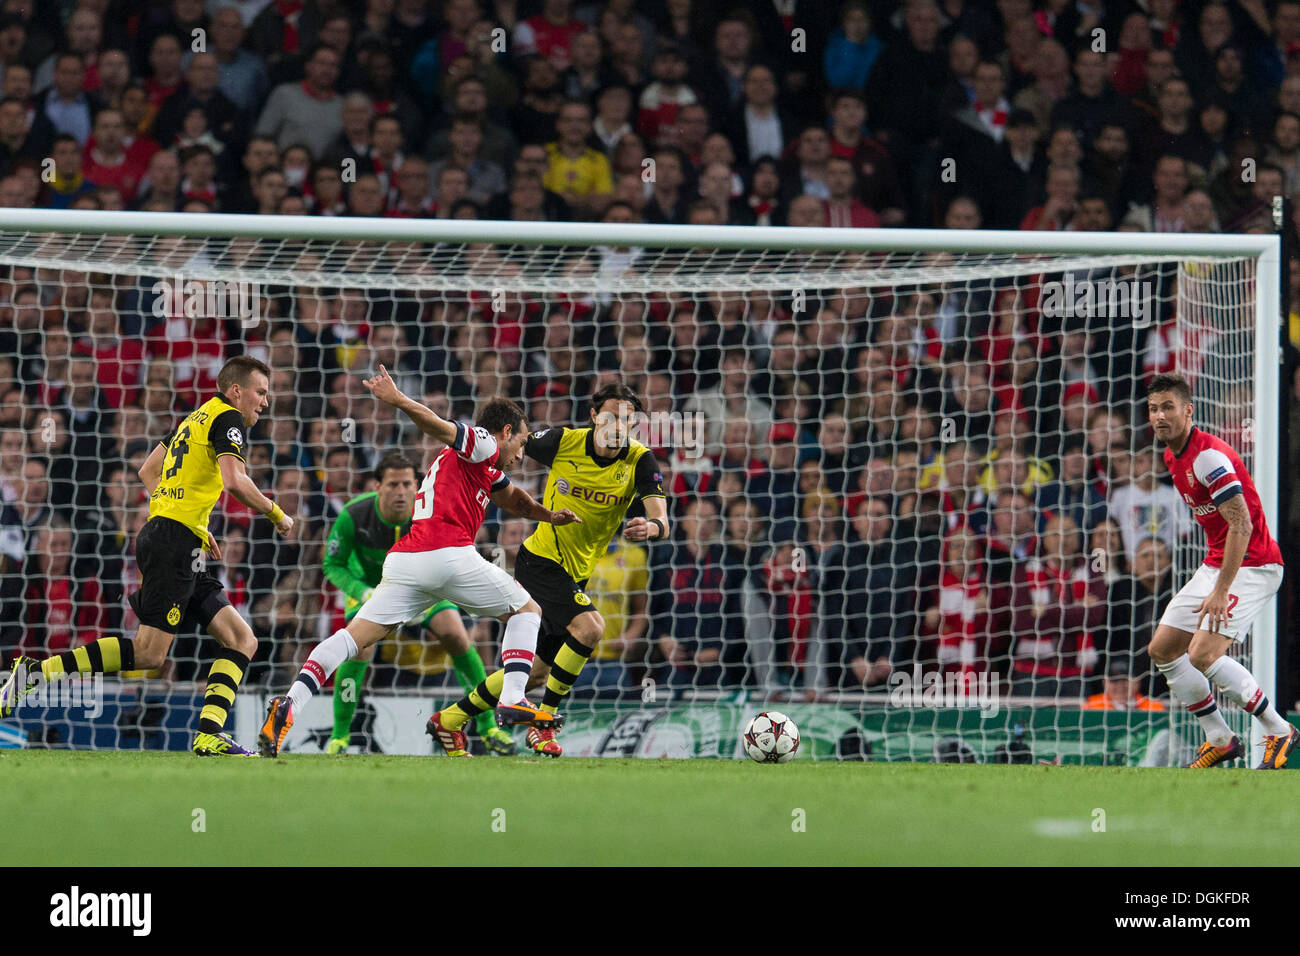 London, UK. 22nd Oct, 2013. Arsenal midfielder Santi CAZORLA lines up a shot during the Champions League game between Arsenal and Borussia Dortmund from the Emirates Stadium. © Action Plus Sports/Alamy Live News Stock Photo